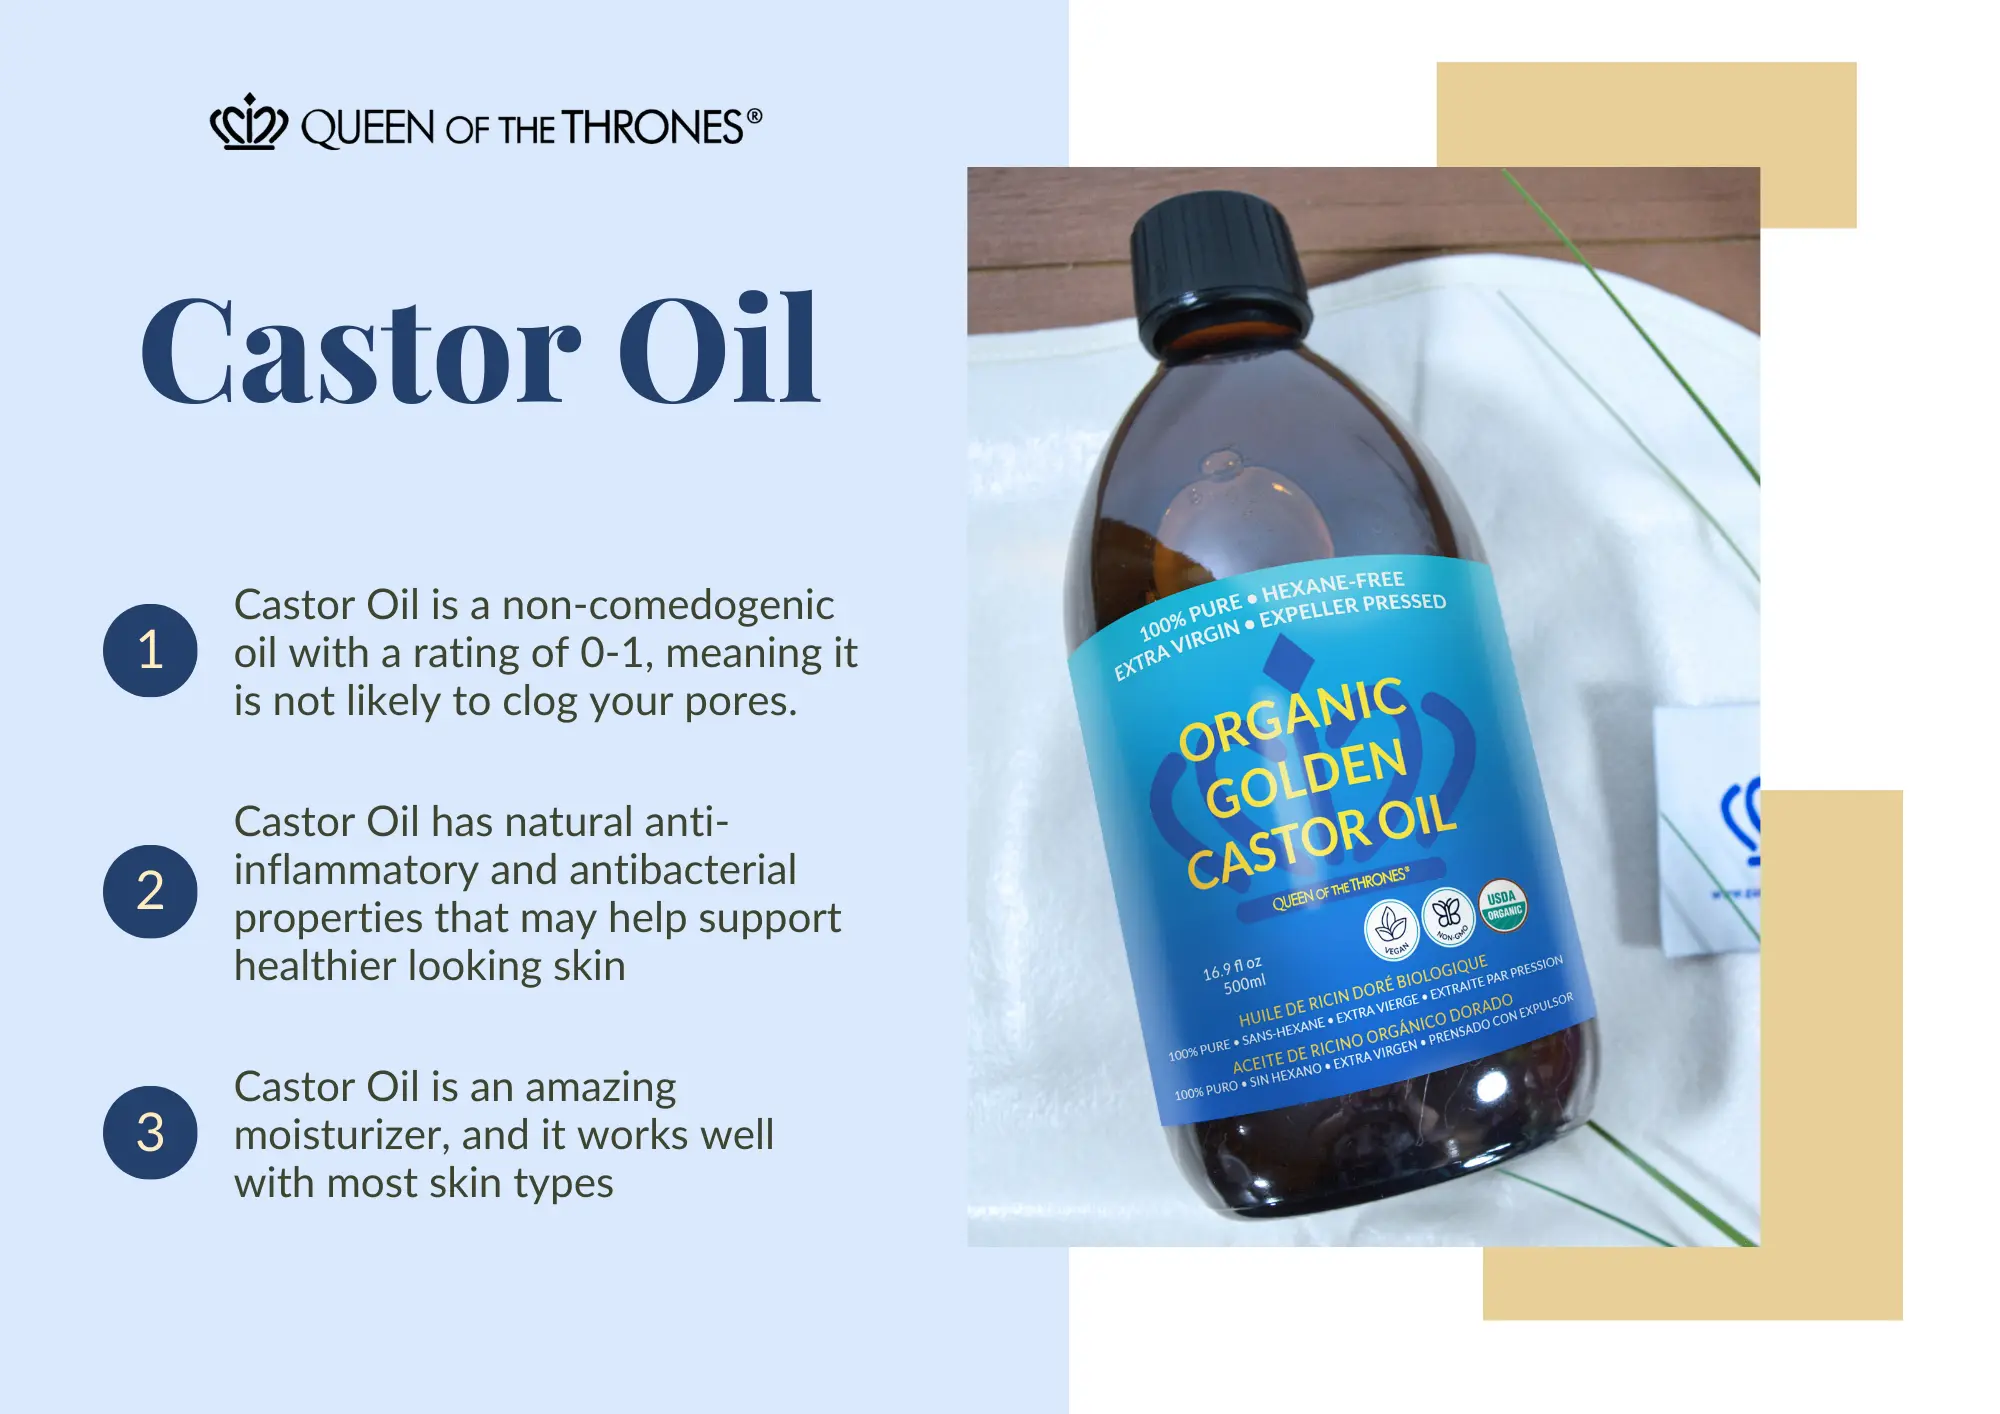 Find out what are the benefits of Queen of the Thrones Castor Oil